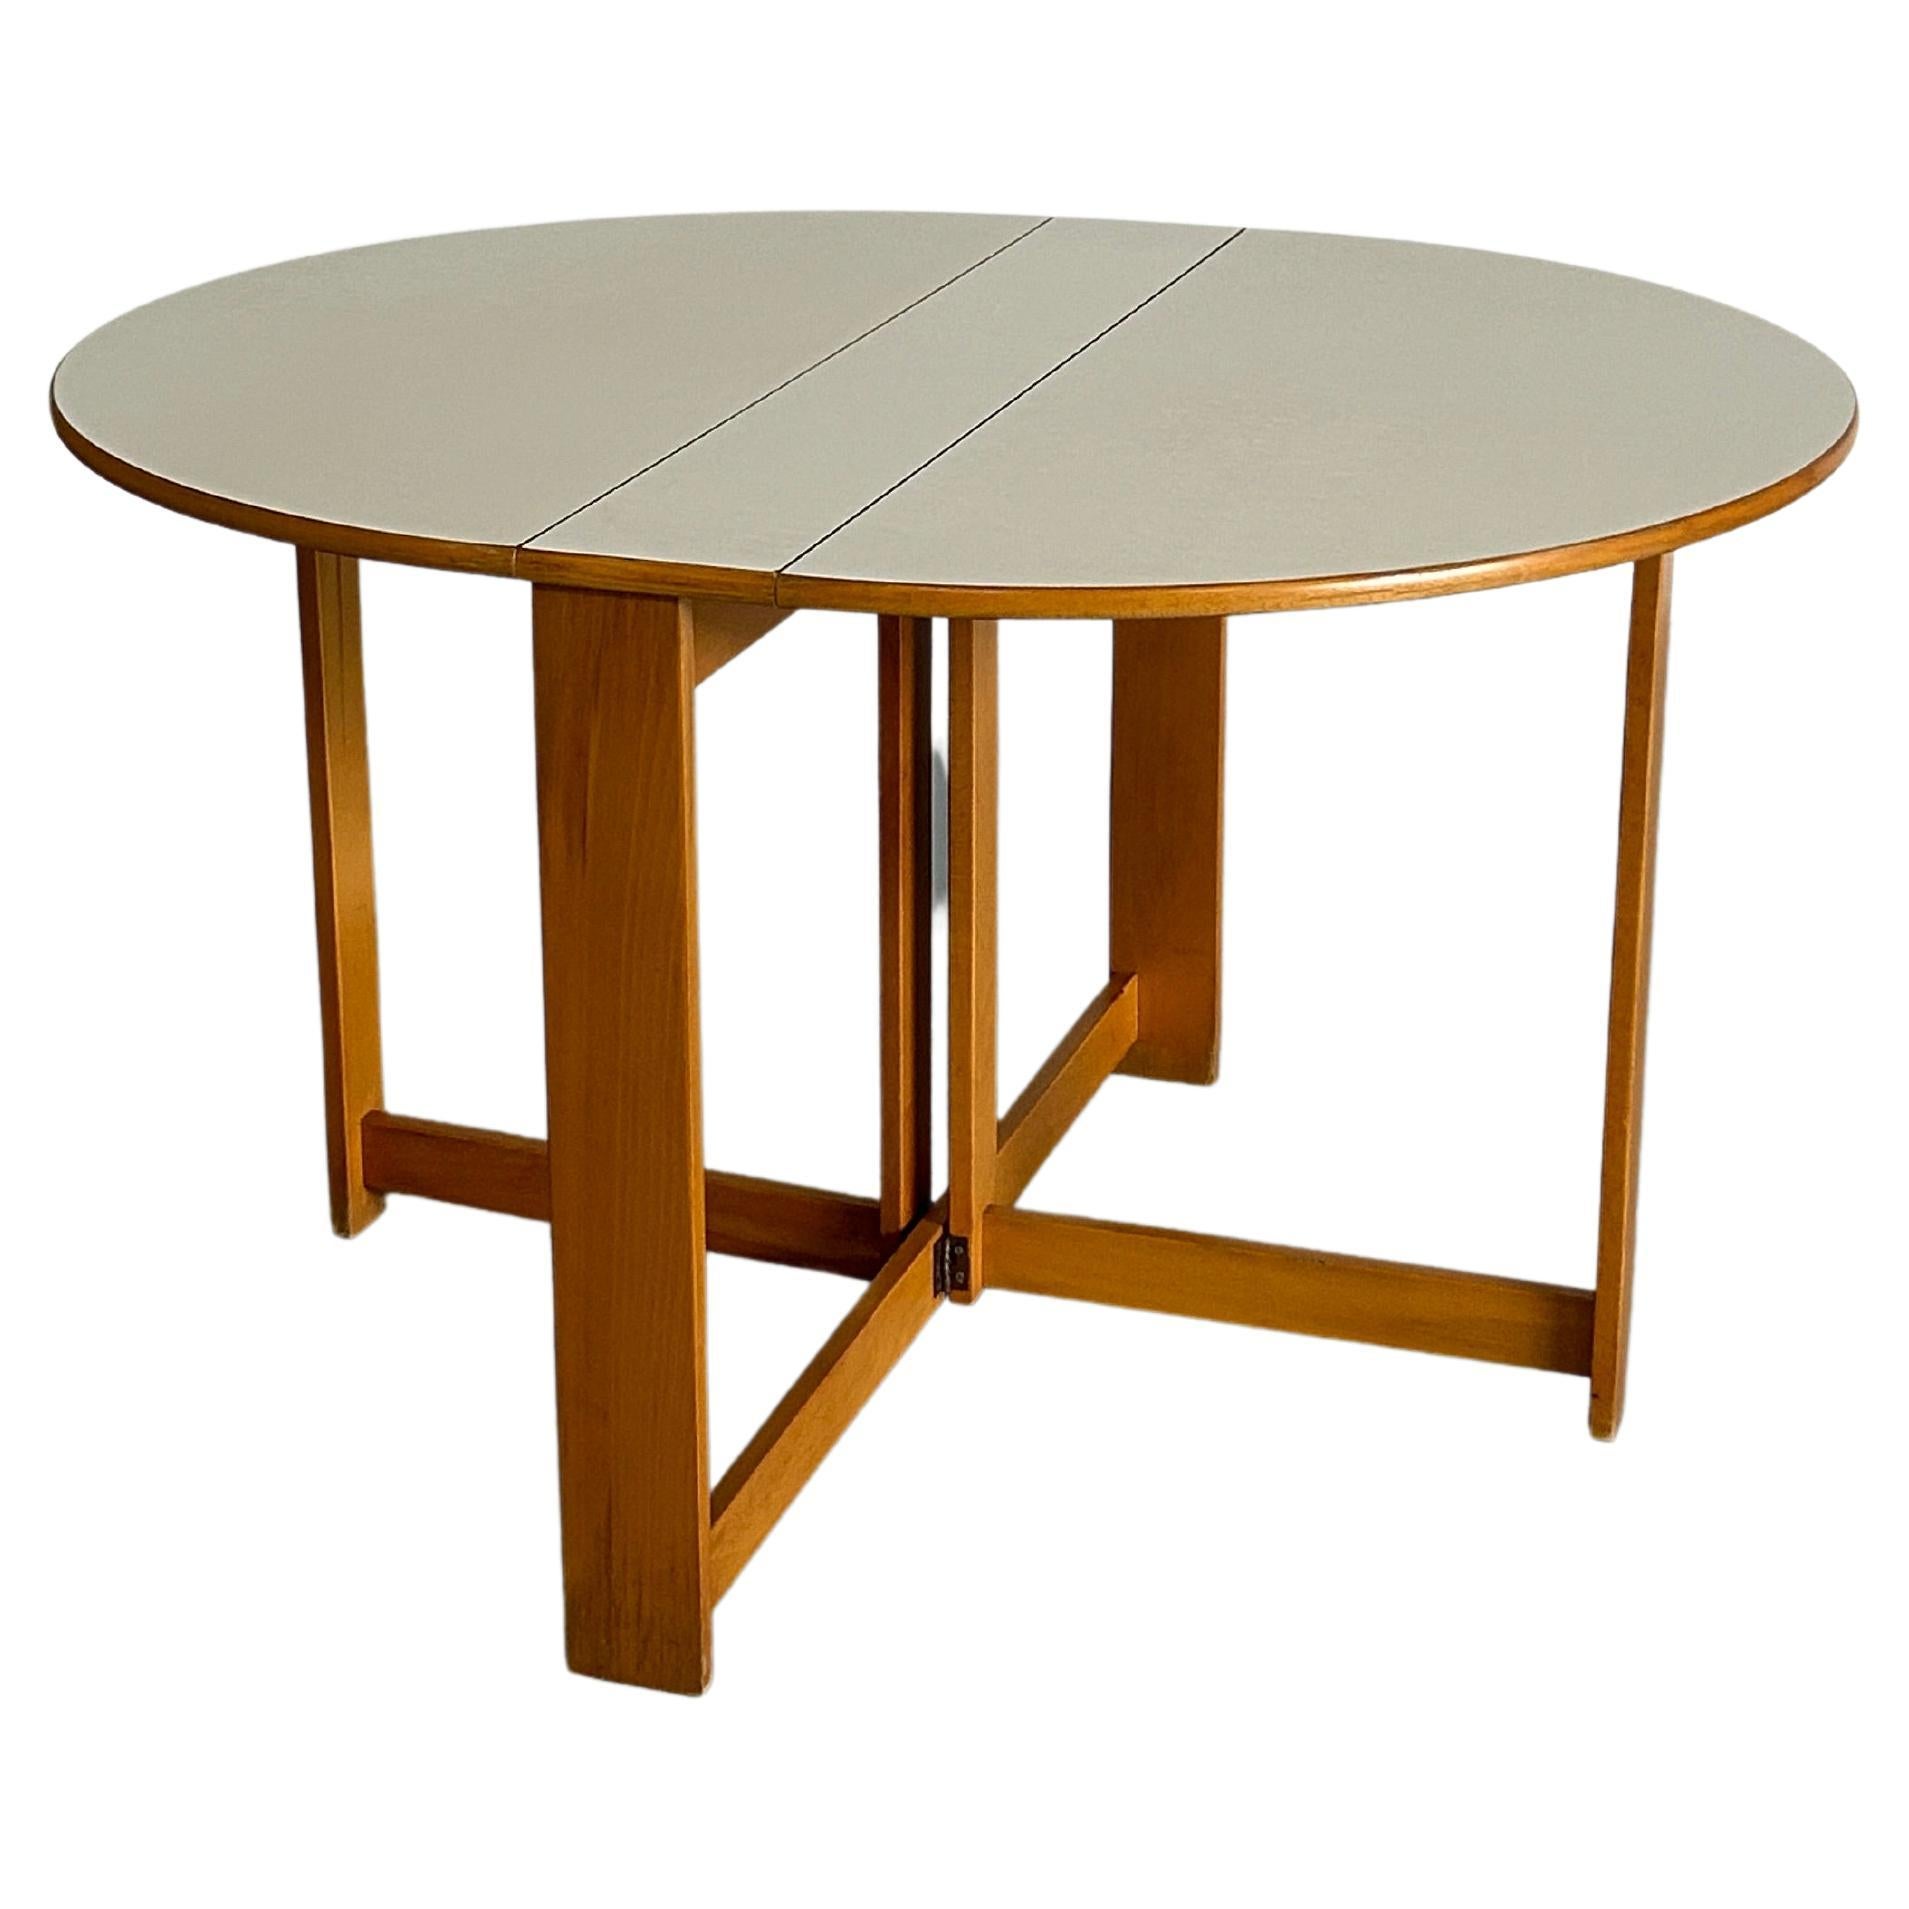 Round Scandinavian Vintage Oakwood Foldable Dining Table with Side Wings, 1970s